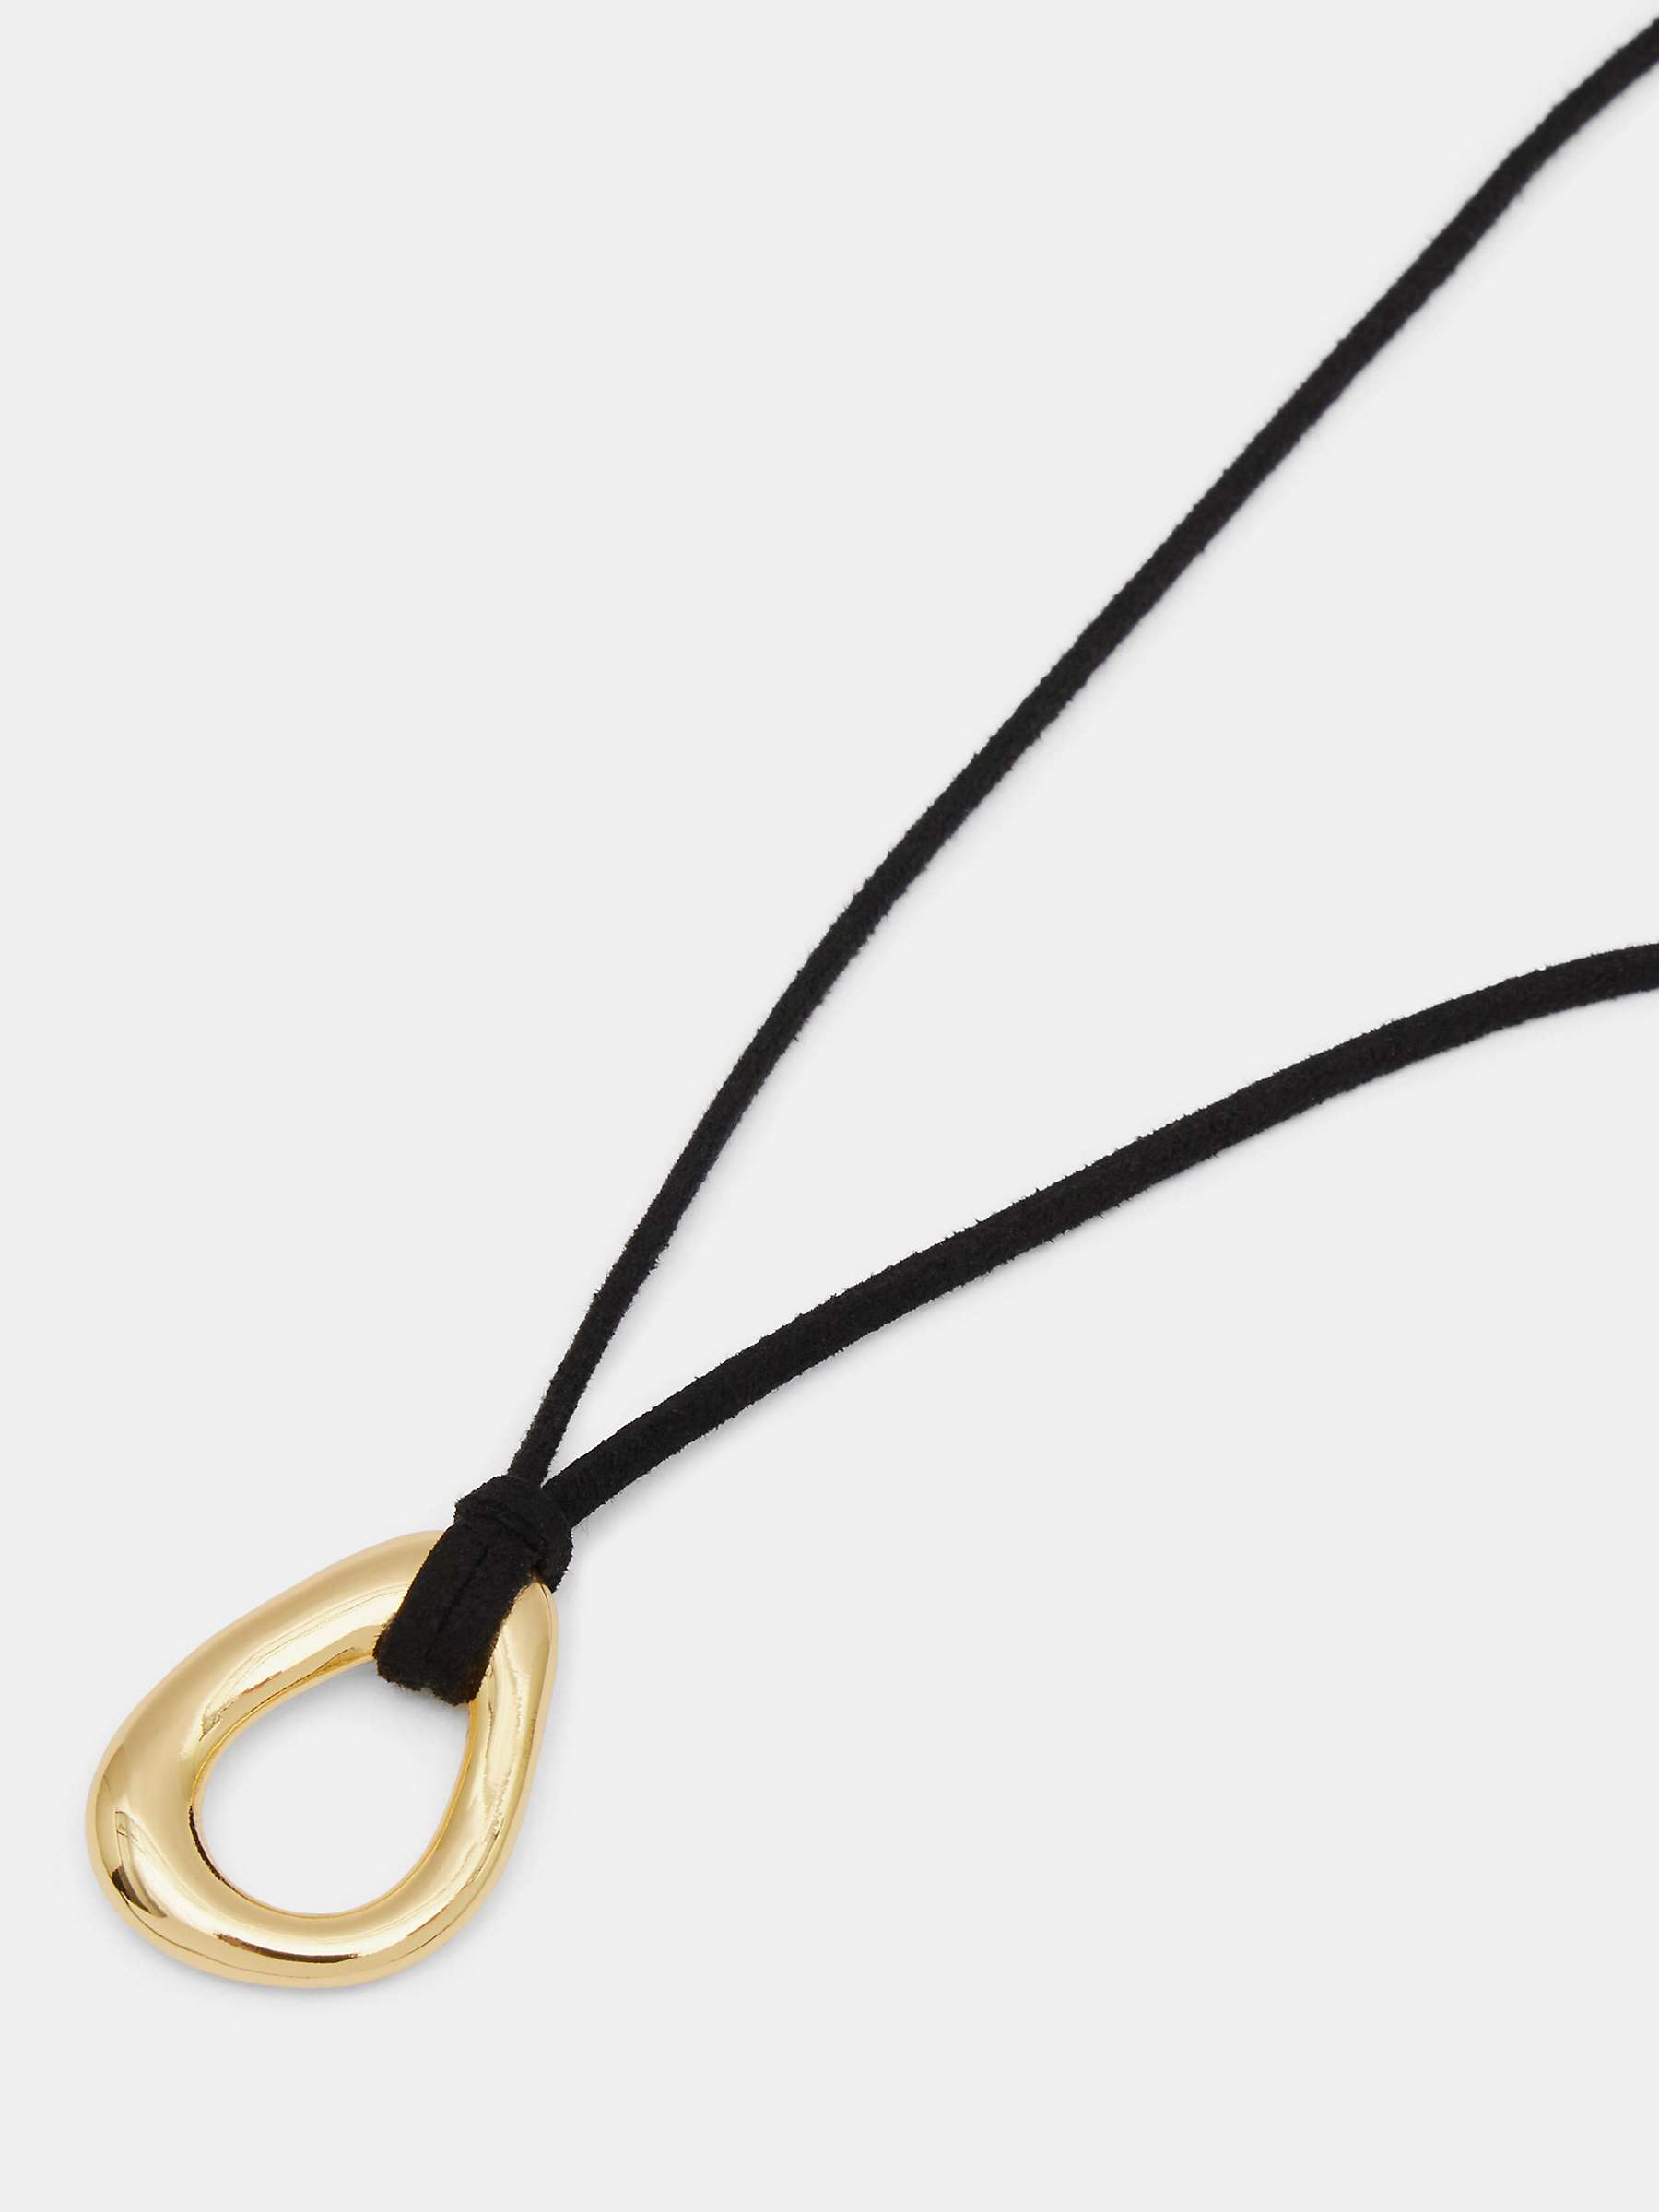 Buy HUSH Ophelia Oval Open Pendant Necklace Online at johnlewis.com